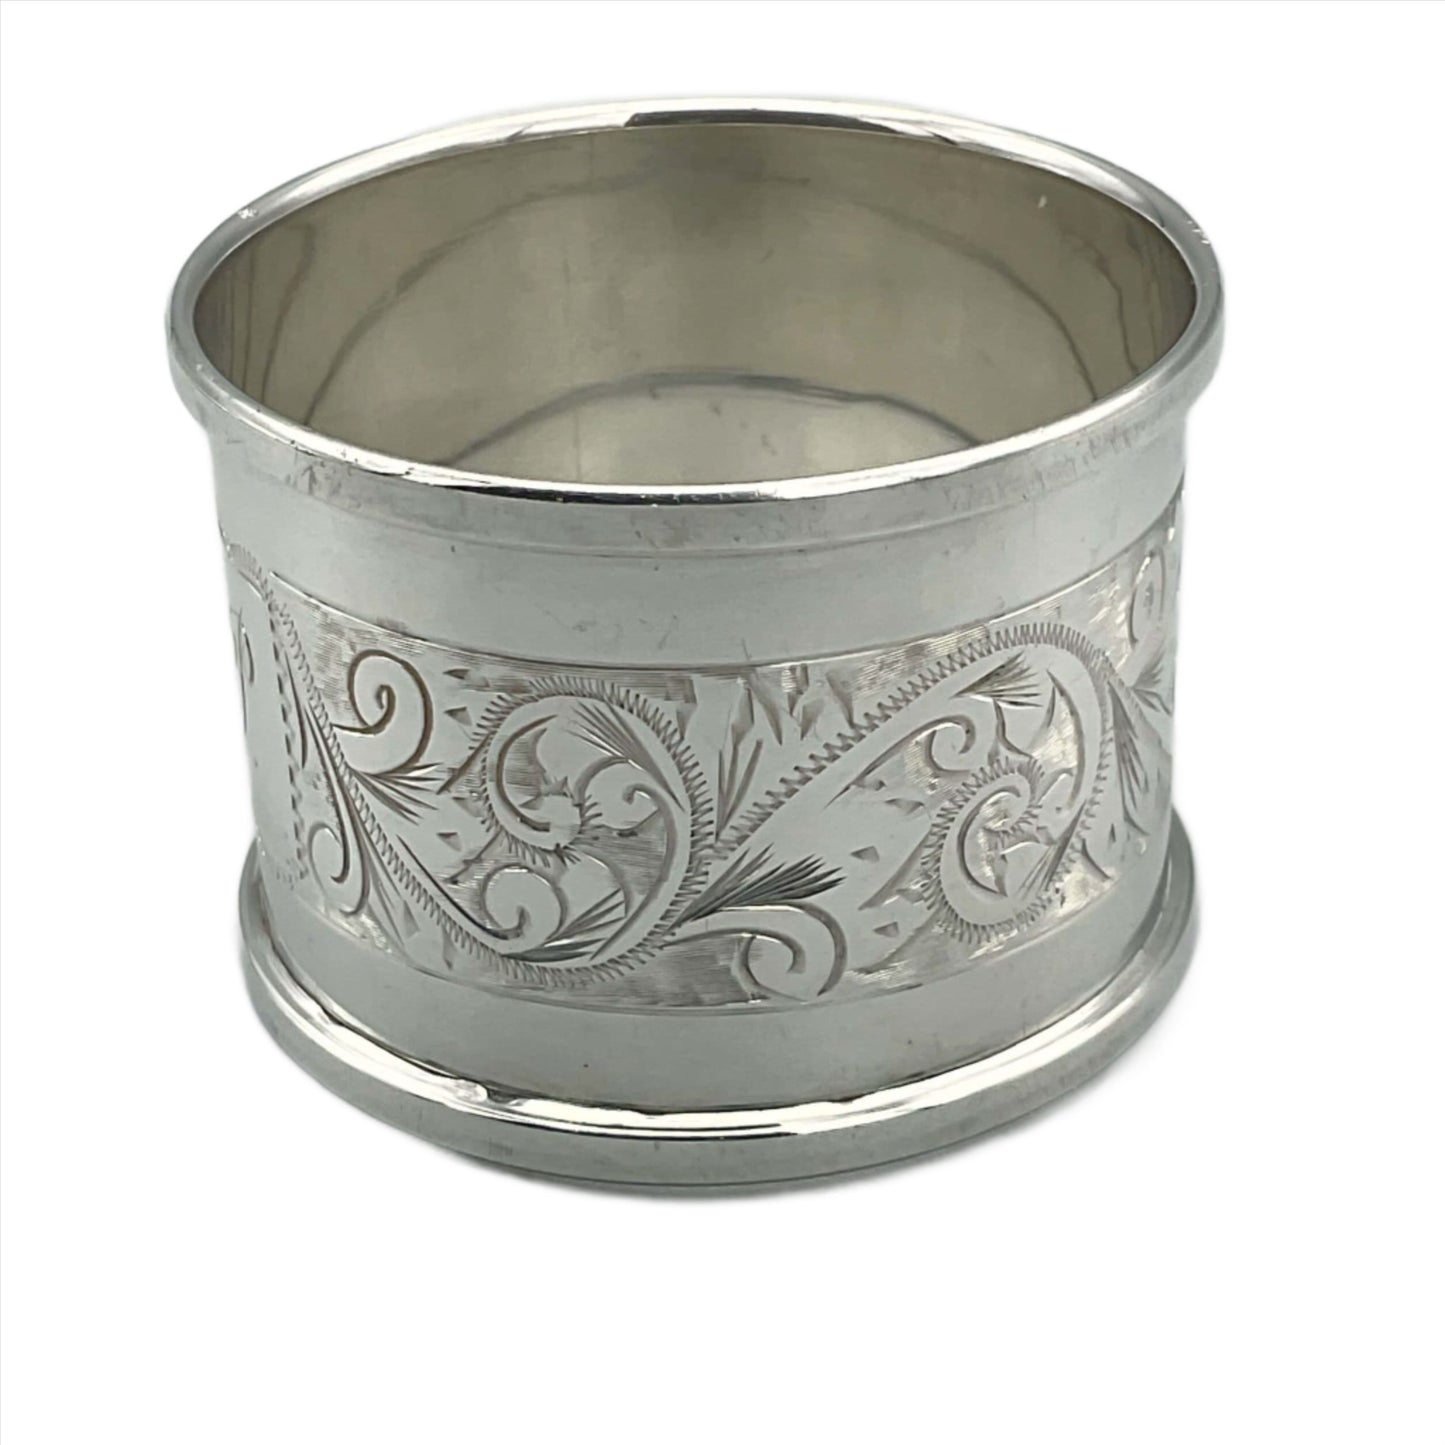 Back view of napkin ring showing a beautiful engraved leaf design on a white background